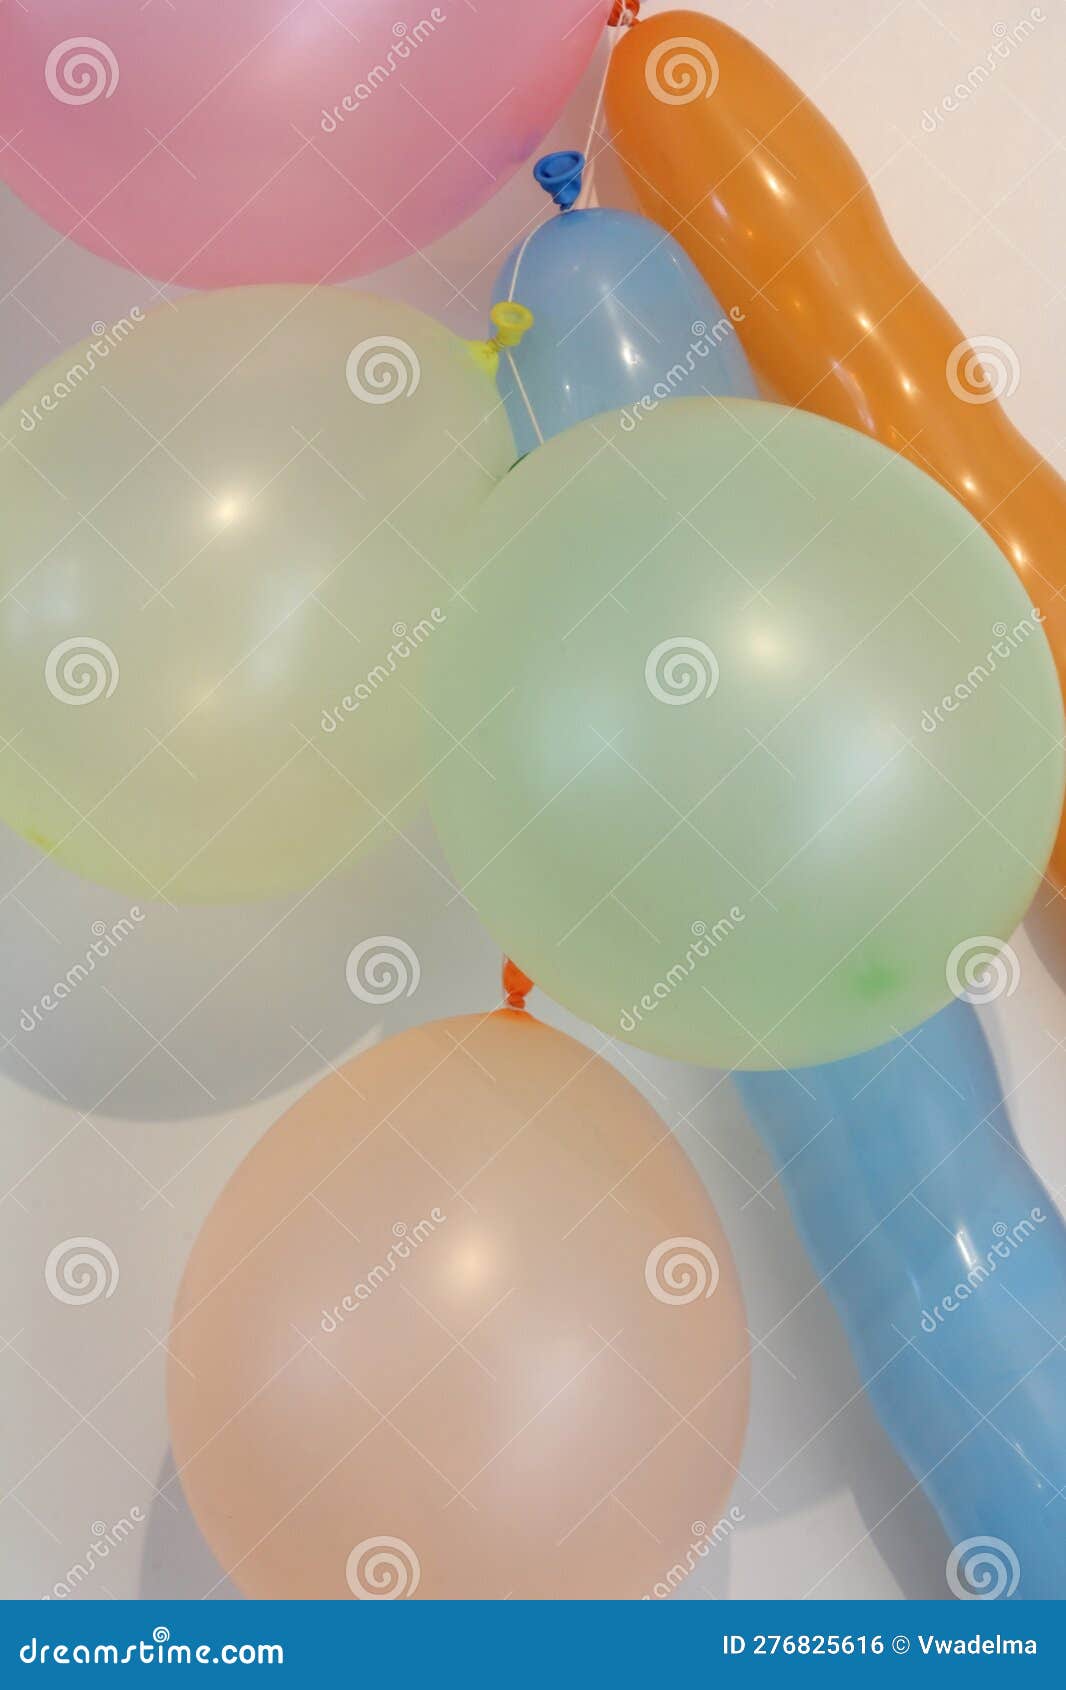 https://thumbs.dreamstime.com/z/colorful-balloons-hanging-string-against-white-background-party-concept-276825616.jpg